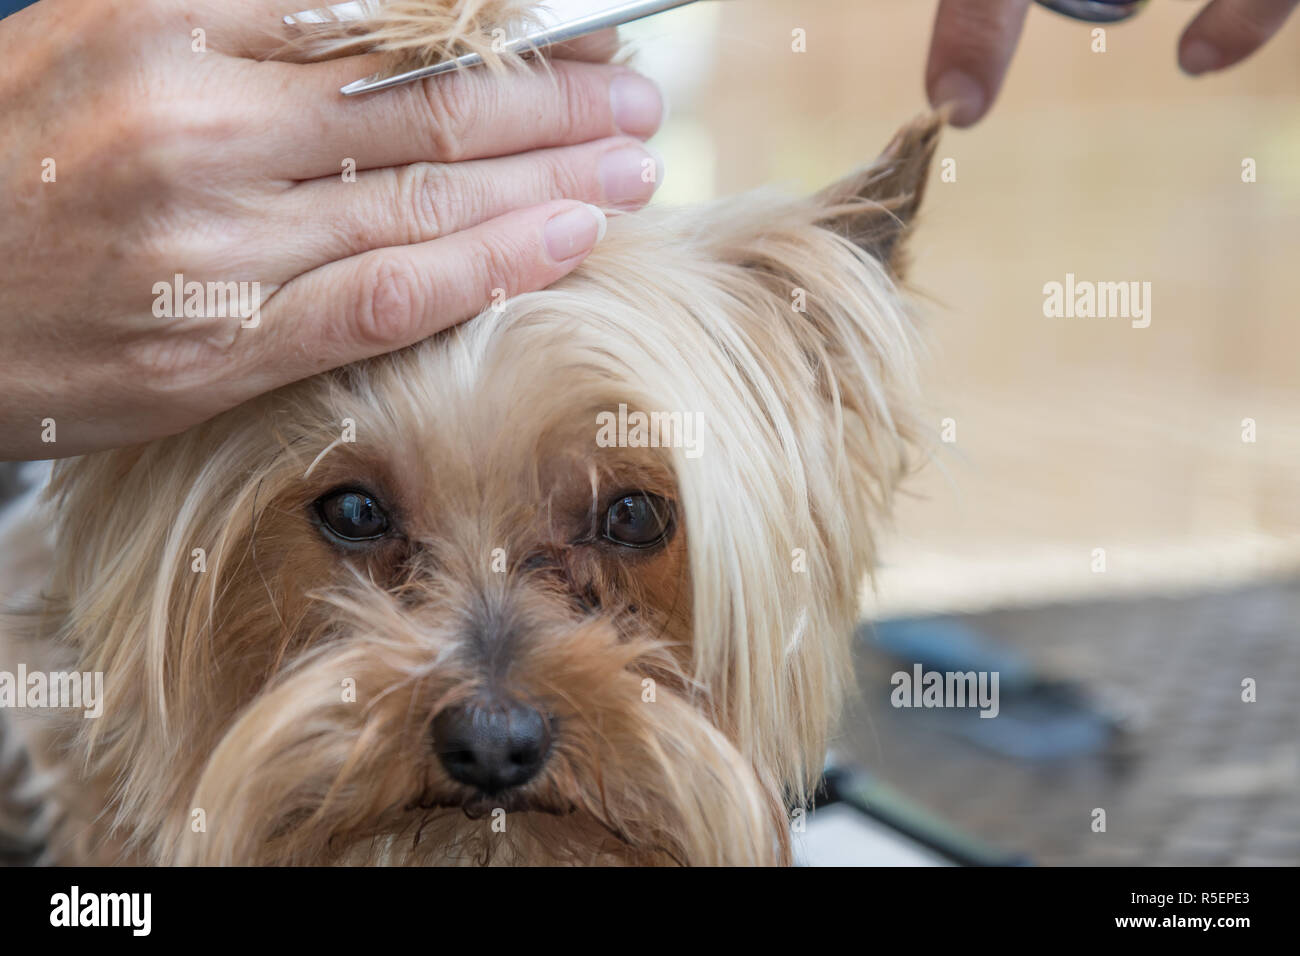 Grooming head of Yorkshire terrier closeup Stock Photo